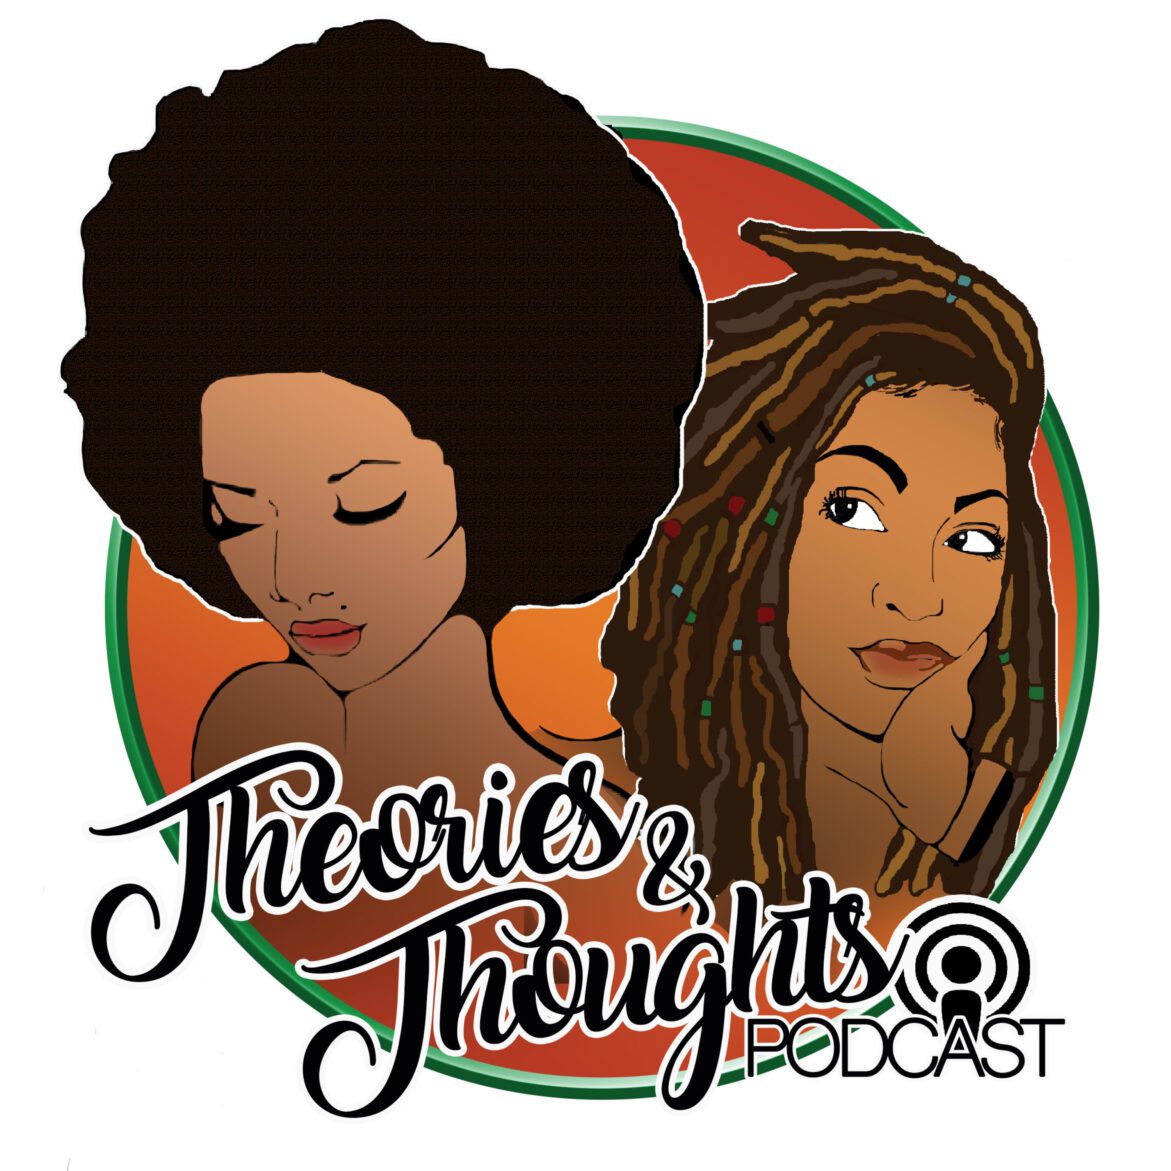 Black Podcasting - Theories & Thoughts: Episode 47- One Year Anniversary